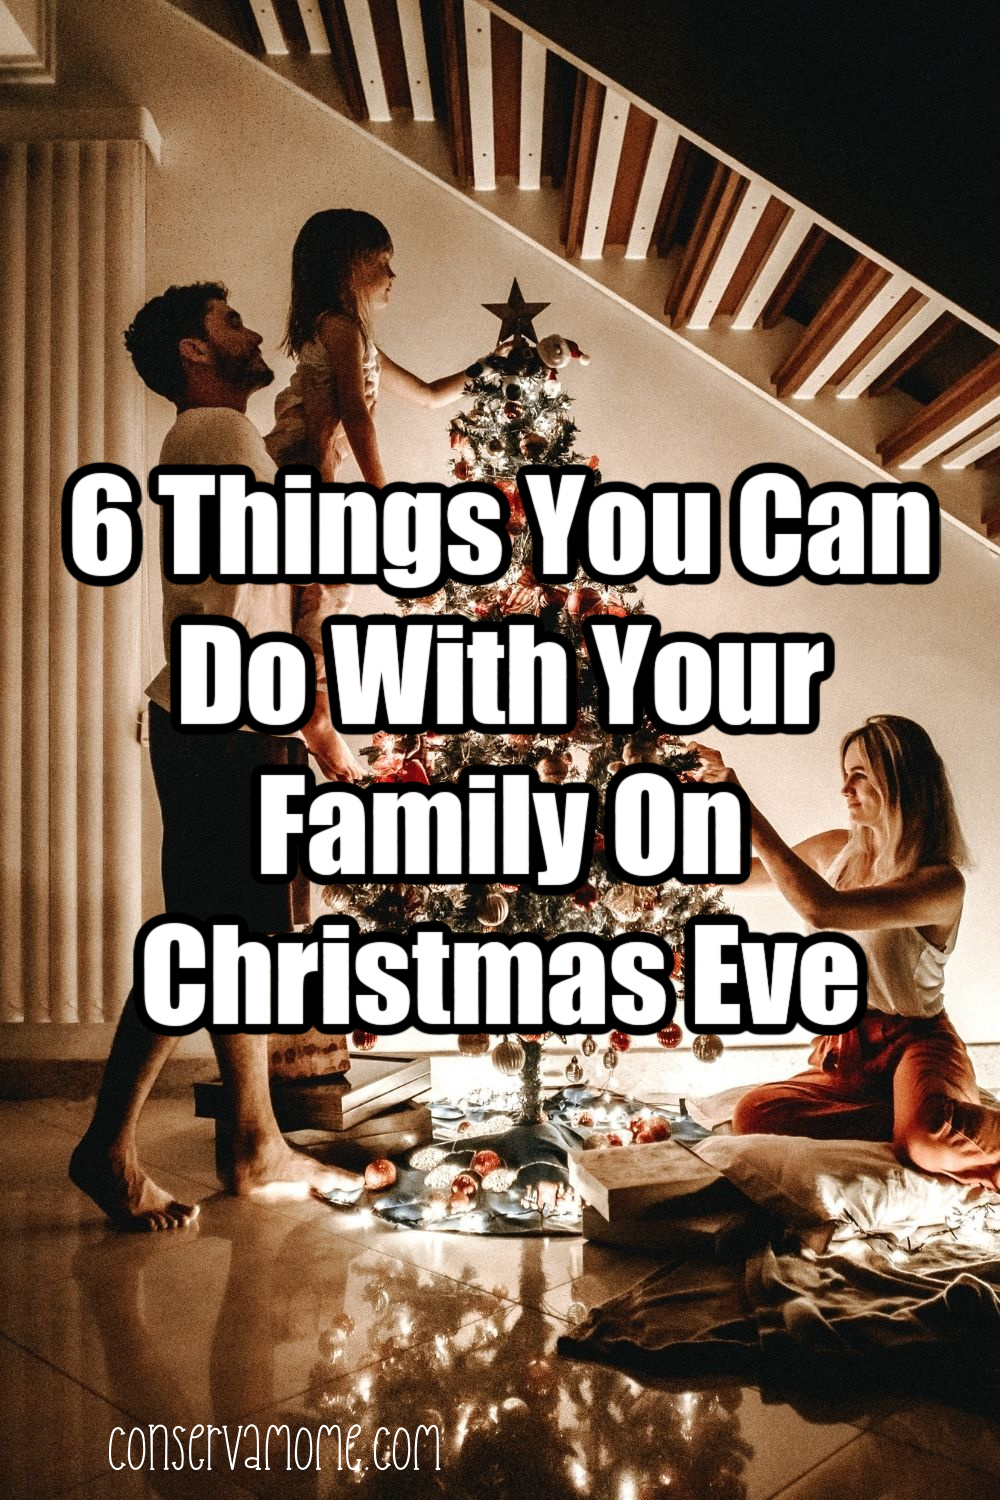 6 Things You Can Do With Your Family On Christmas Eve